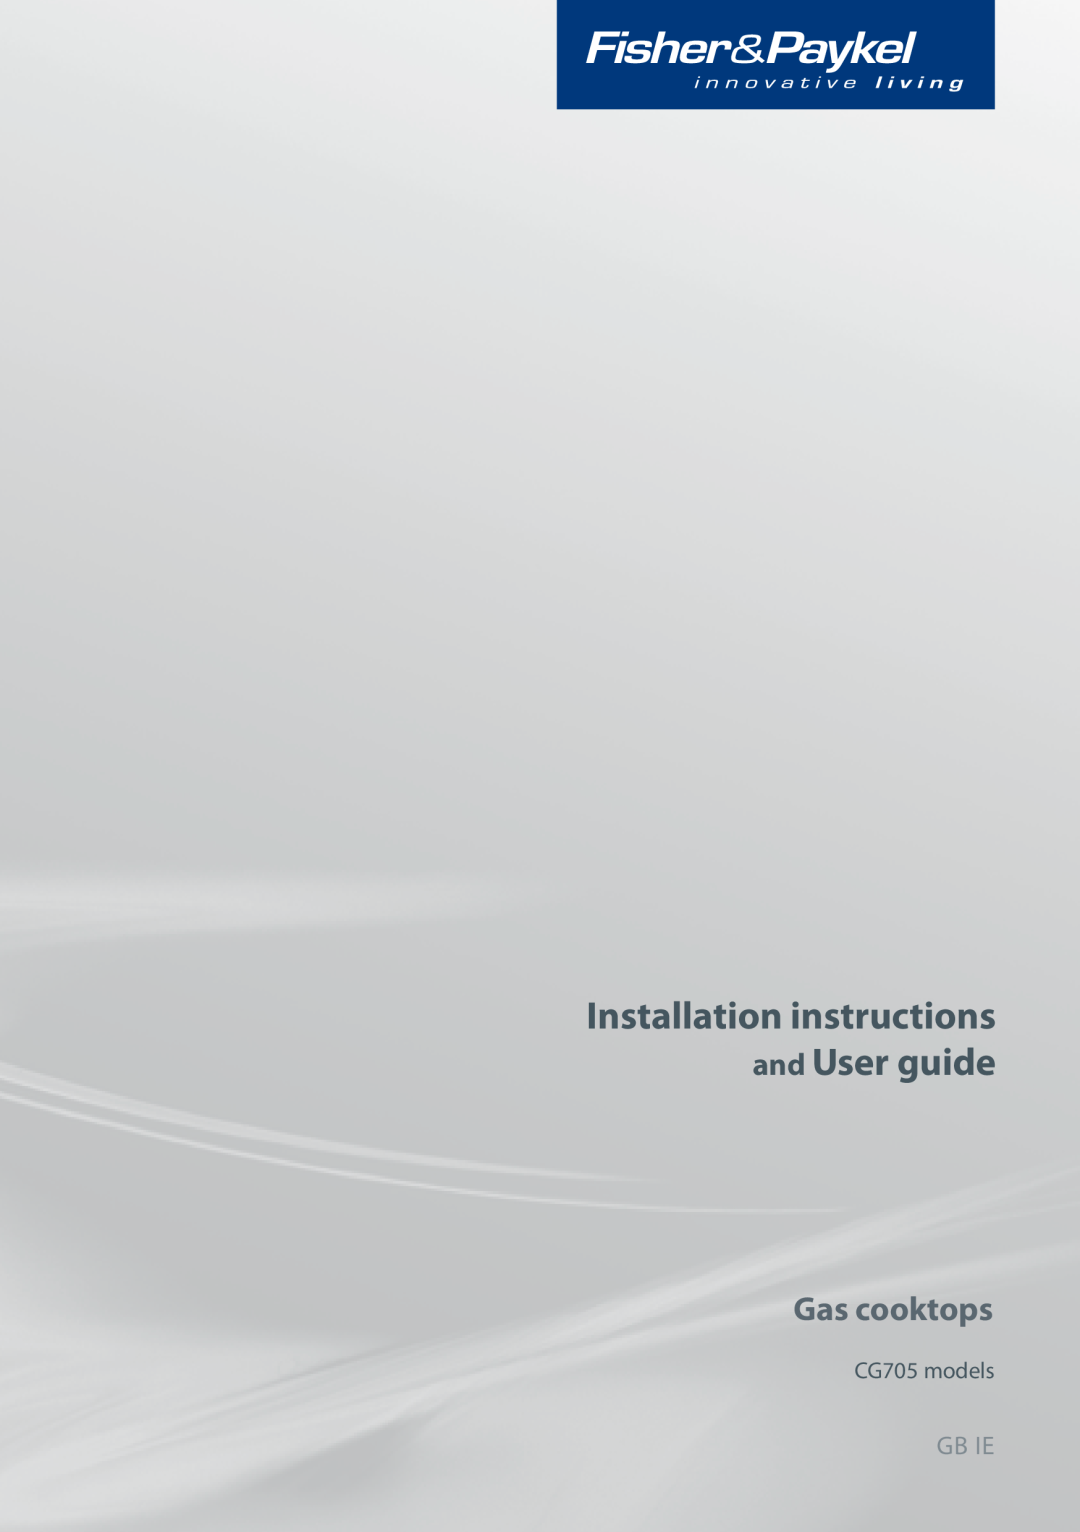 Fisher & Paykel CG705 installation instructions Installation instructions and User guide, Gas cooktops, Gb Ie 